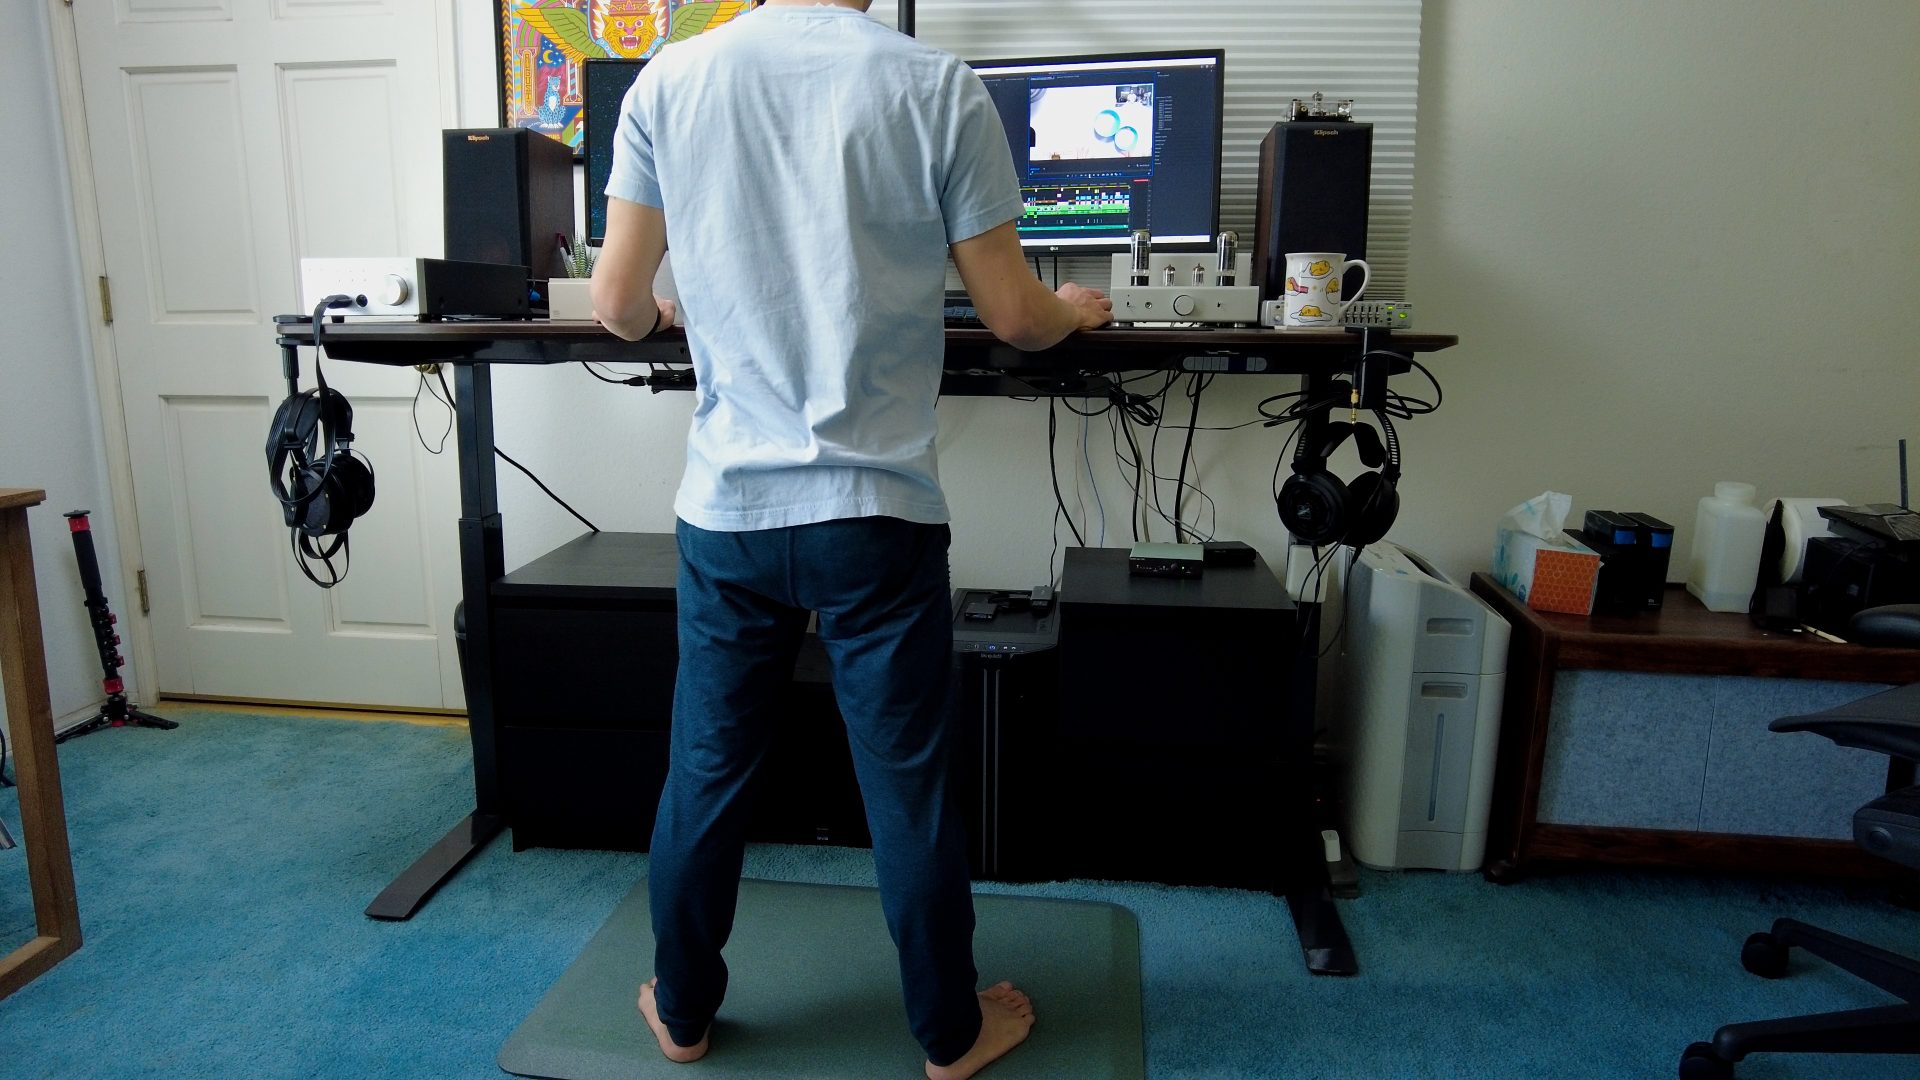 Pat Tokuyama working while standing in his apex desk series 71